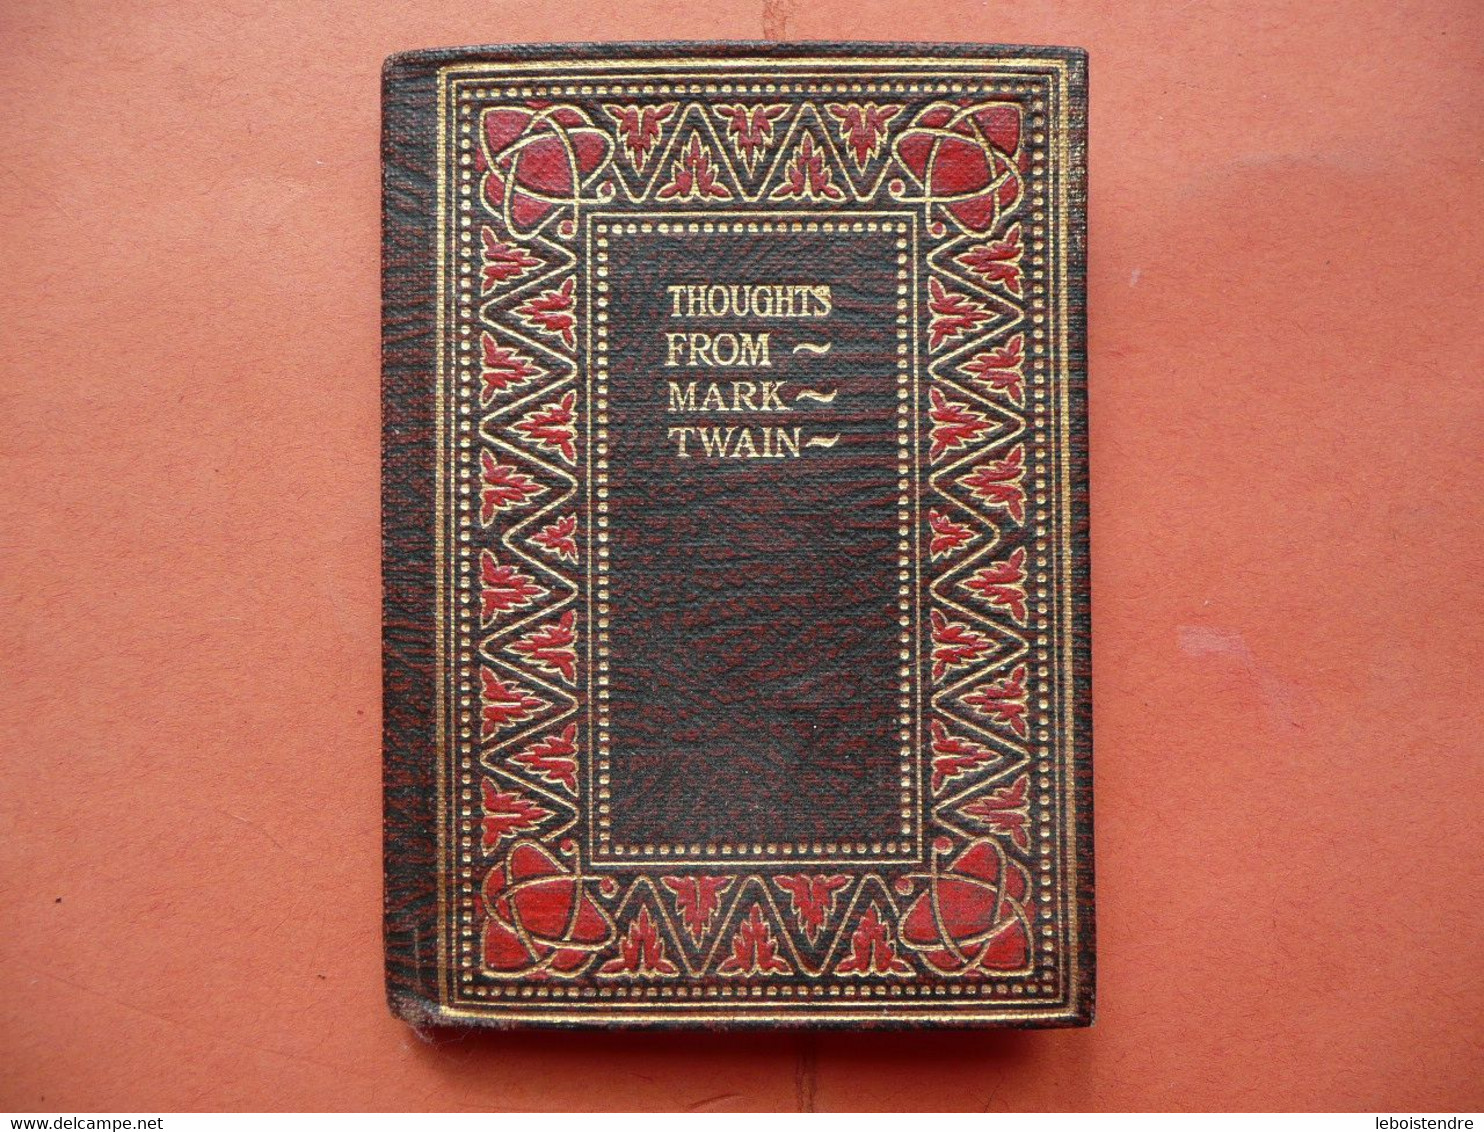 THOUGHTS FROM MARK TWAIN SELECTED BY ELSIE E. MORTON SESAME BOOKLETS MINIATURE - Literatura